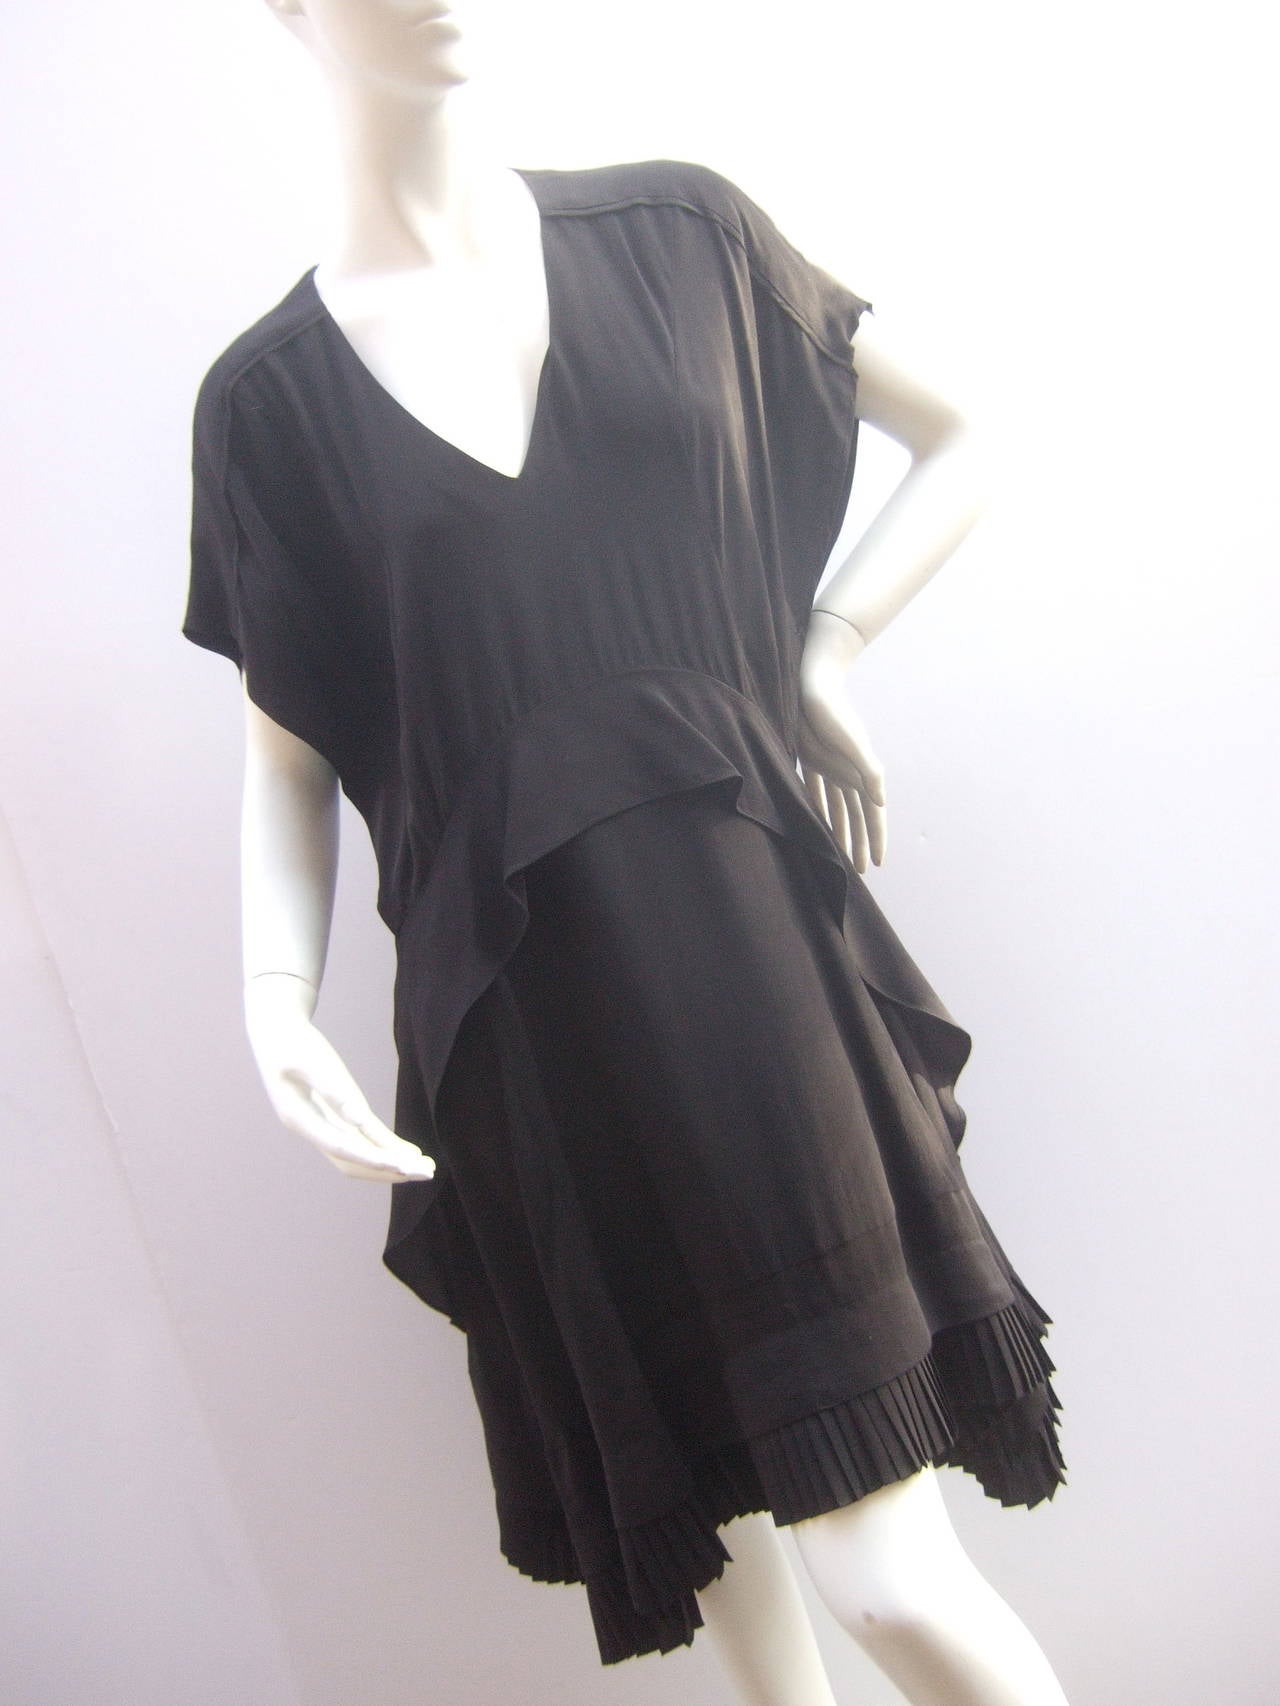 Balenciaga Sumptuous black silk dress. The elegant dress is designed with a bias peplum seam at the waist line that cascades down the front sides
The asymmetrical hemline is designed with accordion pleating that circles the hem. The pleated trim